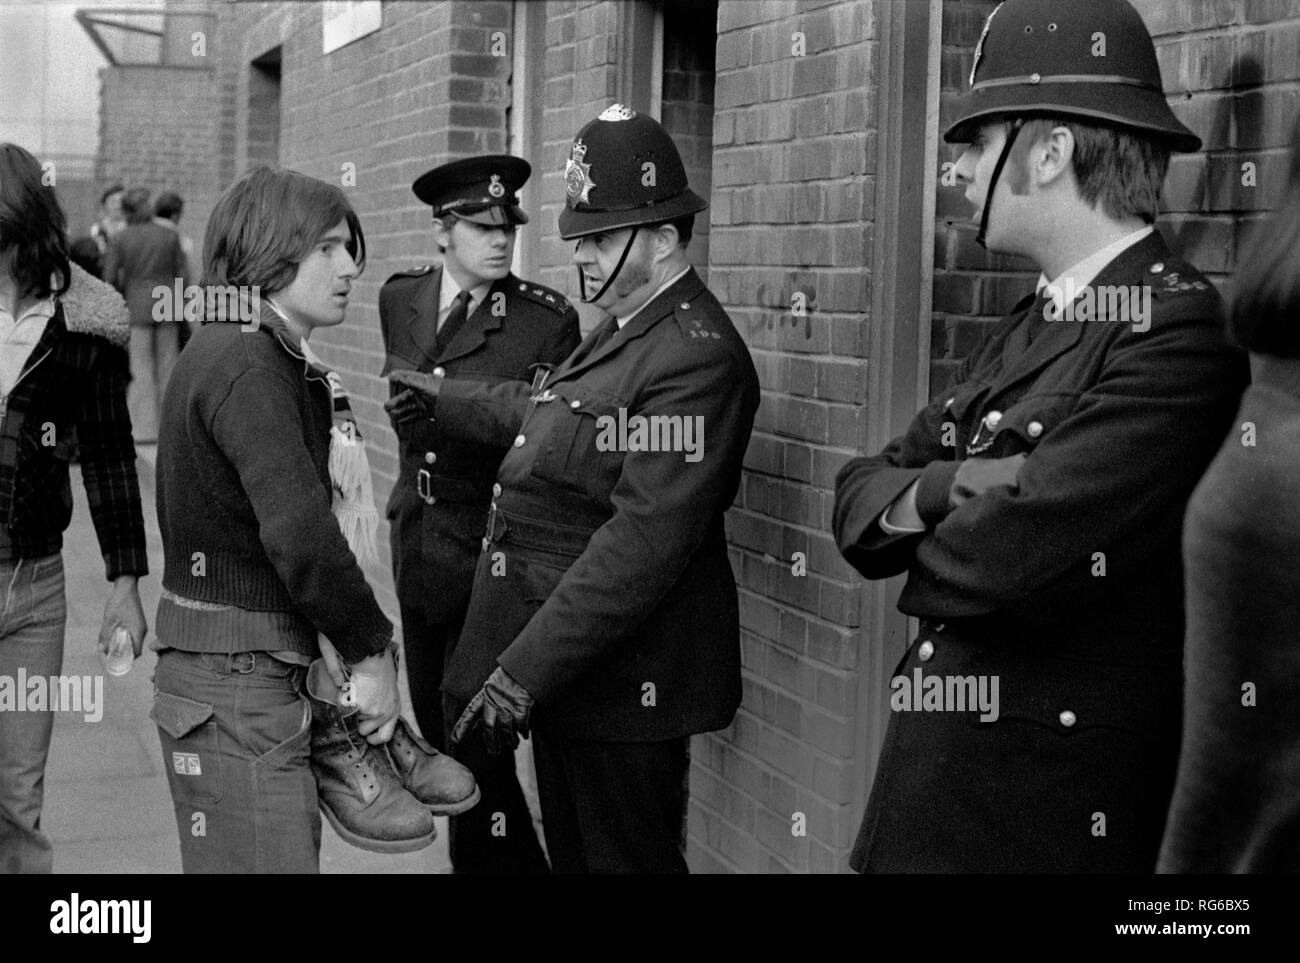 Football fans 1970s UK. Manchester City football fan prevented from entering Queens Park Rangers QPR football ground because he is wearing metal toed working boots. Police said he had to take them off and then was allowed into the football stadium. 1972 UK HOMER SYKES Stock Photo